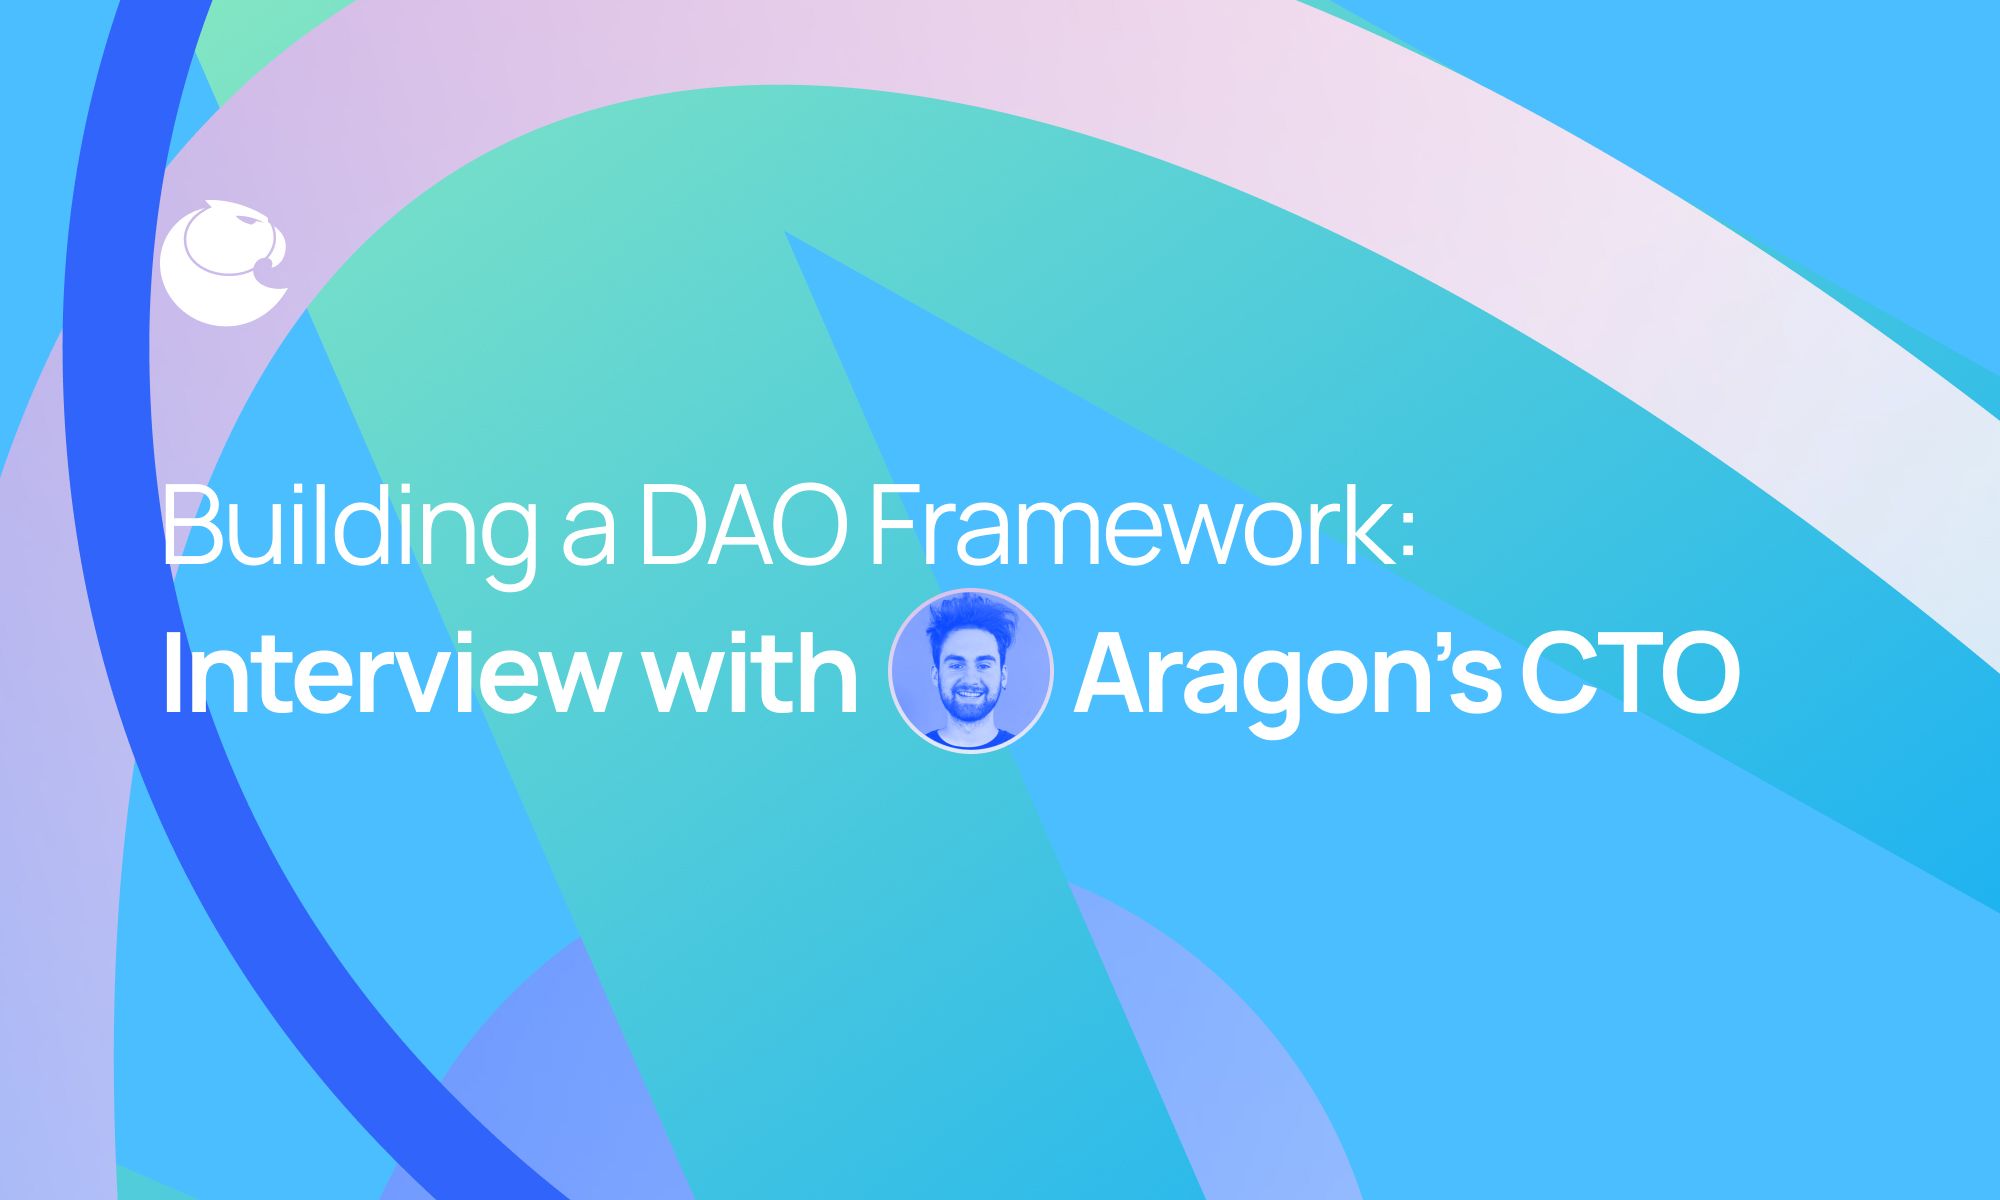 Building a DAO Framework: Interview with Aragon's CTO